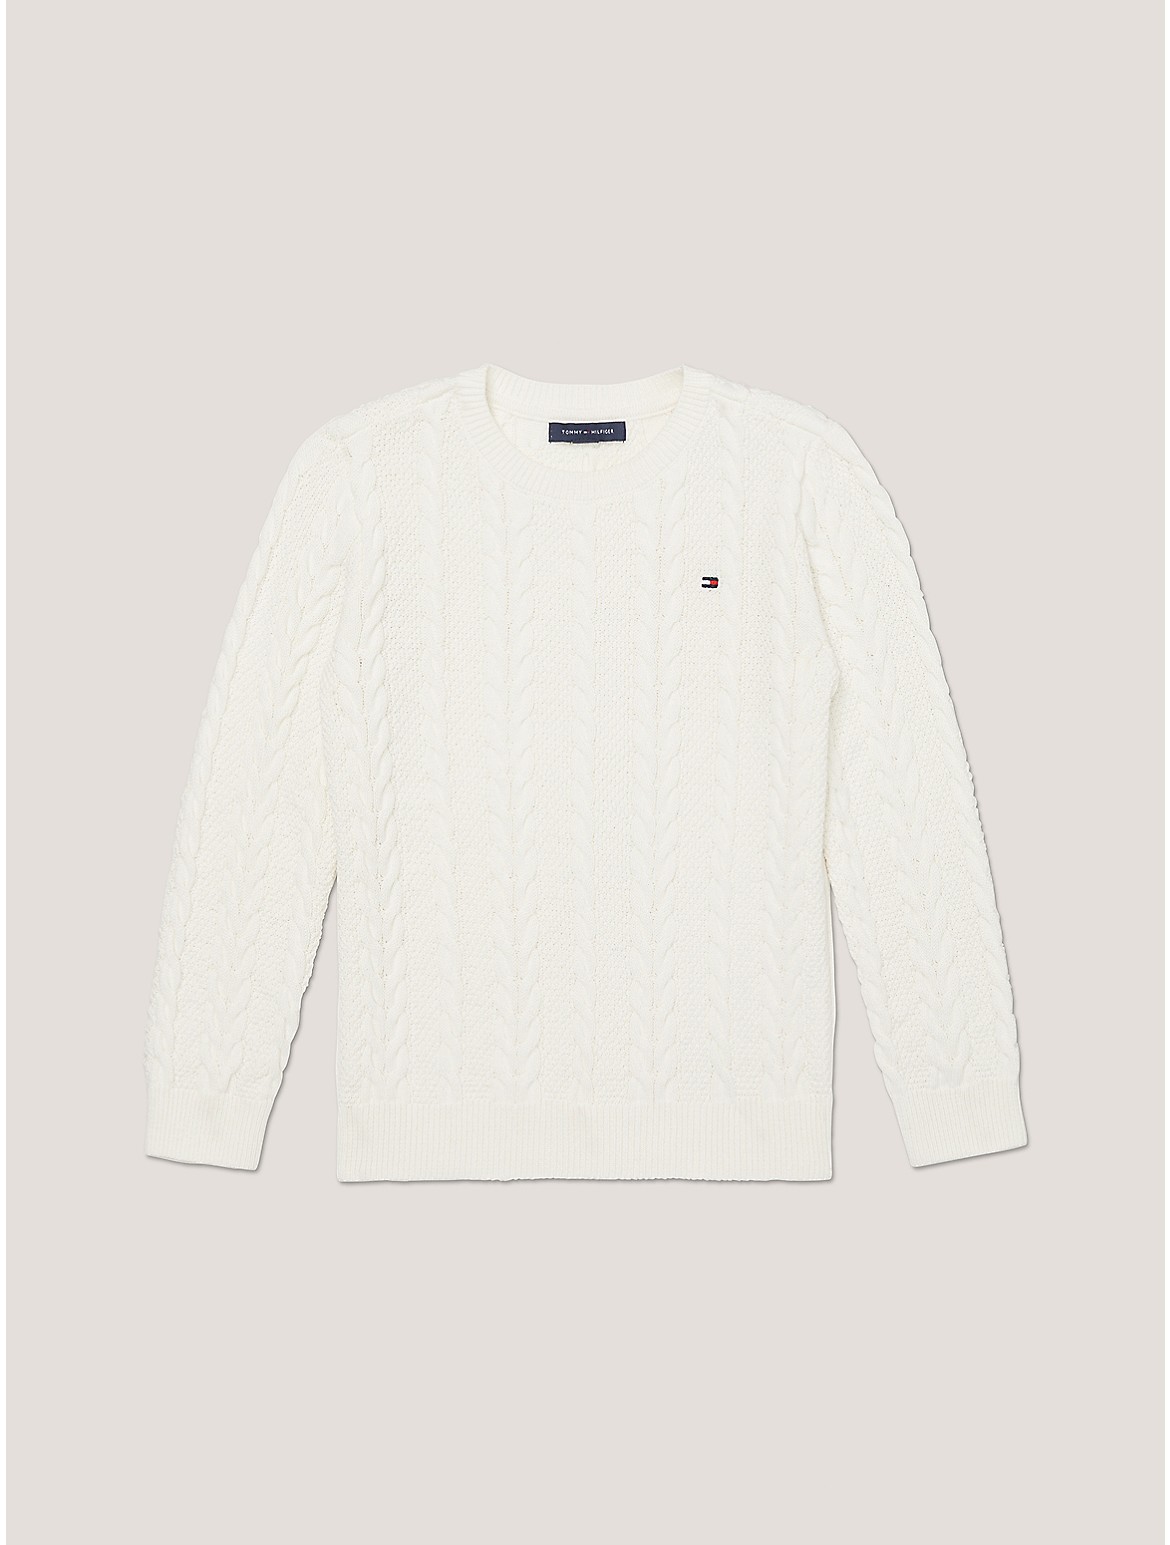 Tommy Hilfiger Boys' Kids' Cable Knit Sweater - White - M